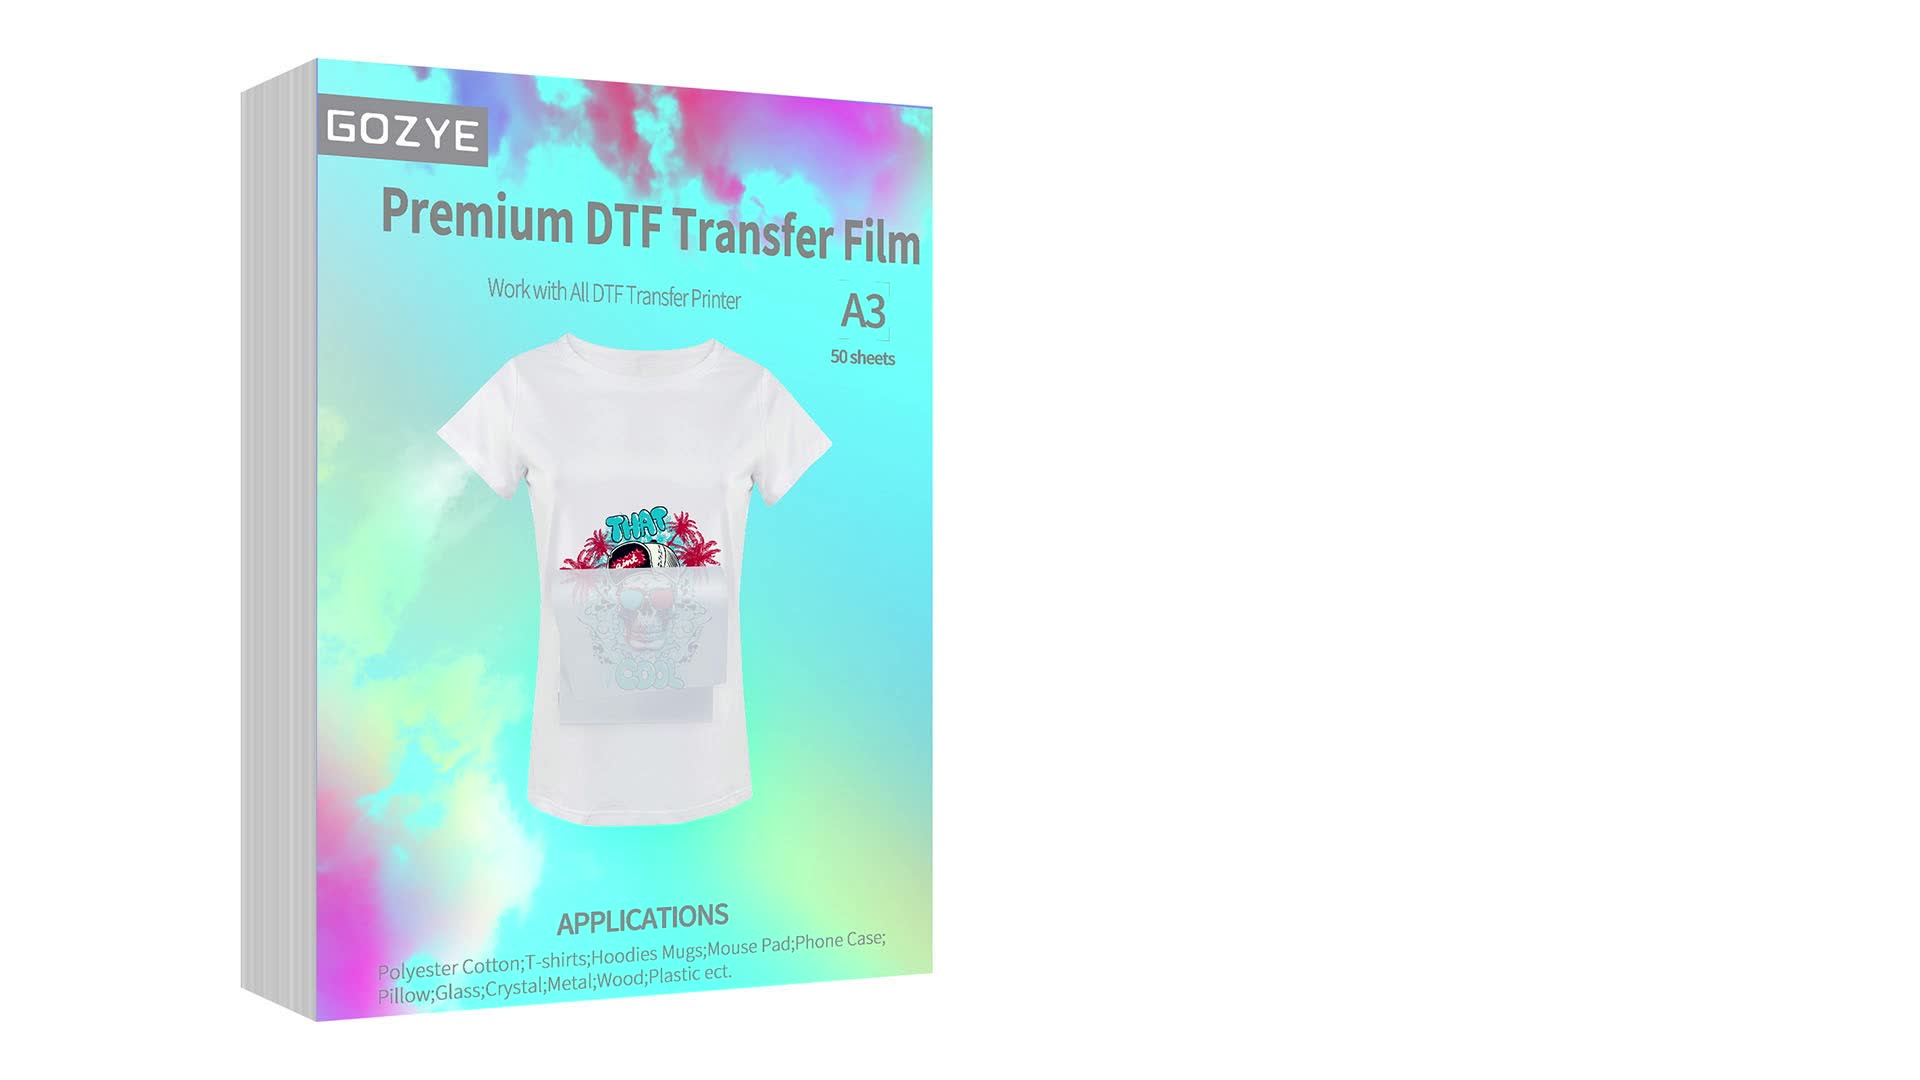  GOZYE Premium DTF Transfer Film - 100 Sheets A3 Matte PET Heat  Transfer Paper for Direct-to-Film Printing on T-Shirts Textile- Size: A3  (11.7 x 16.5)